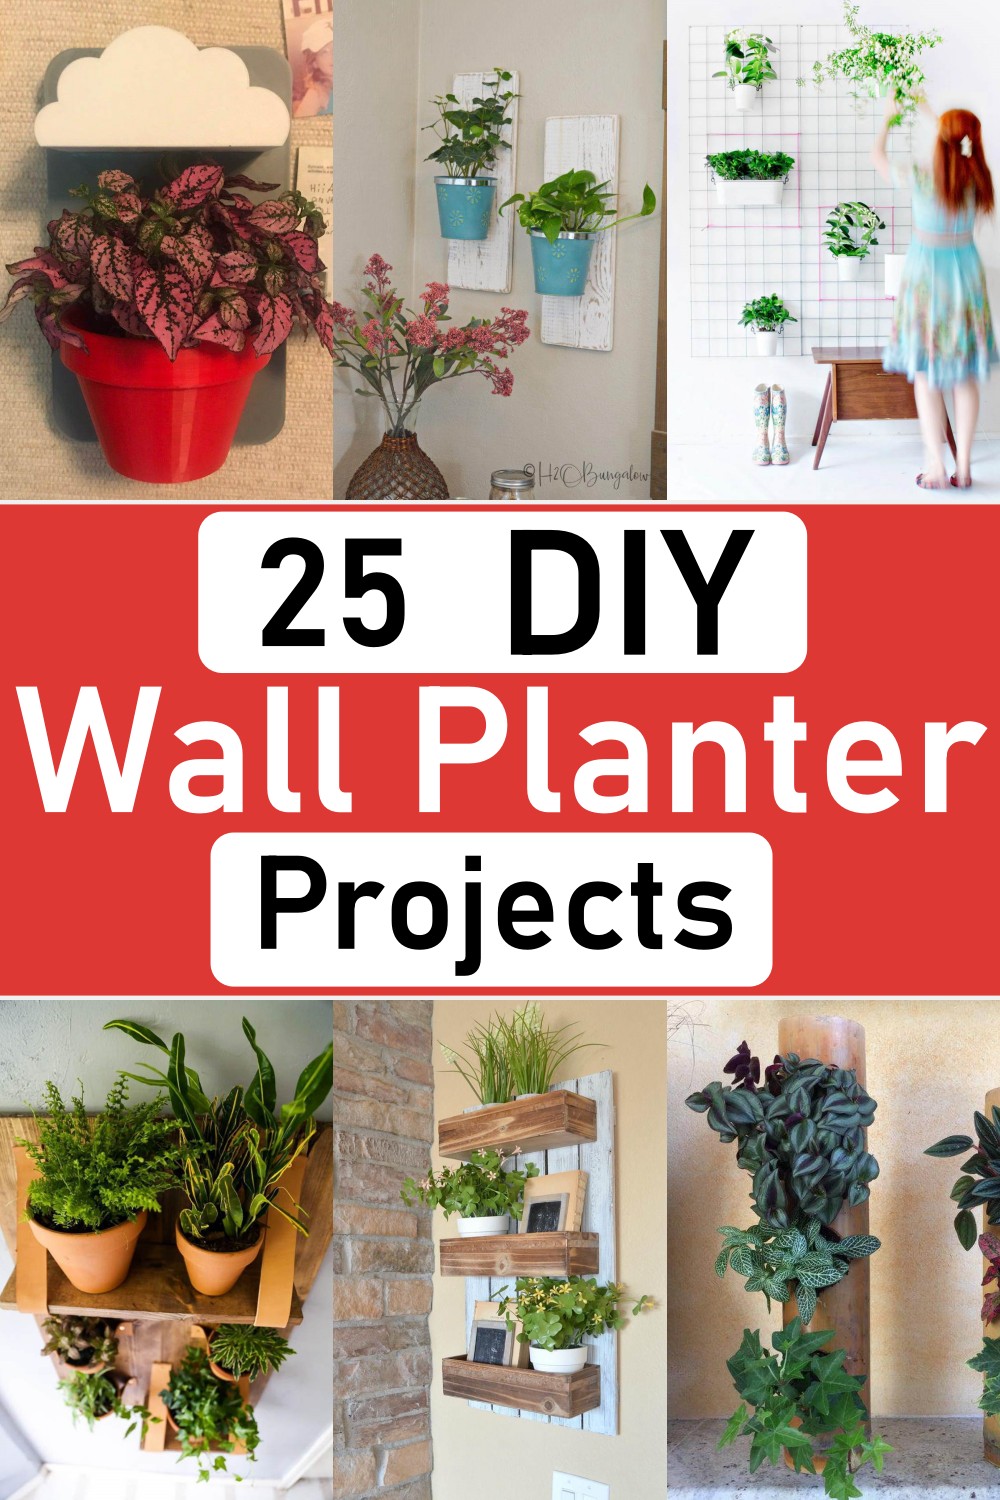 Wall Planter Projects